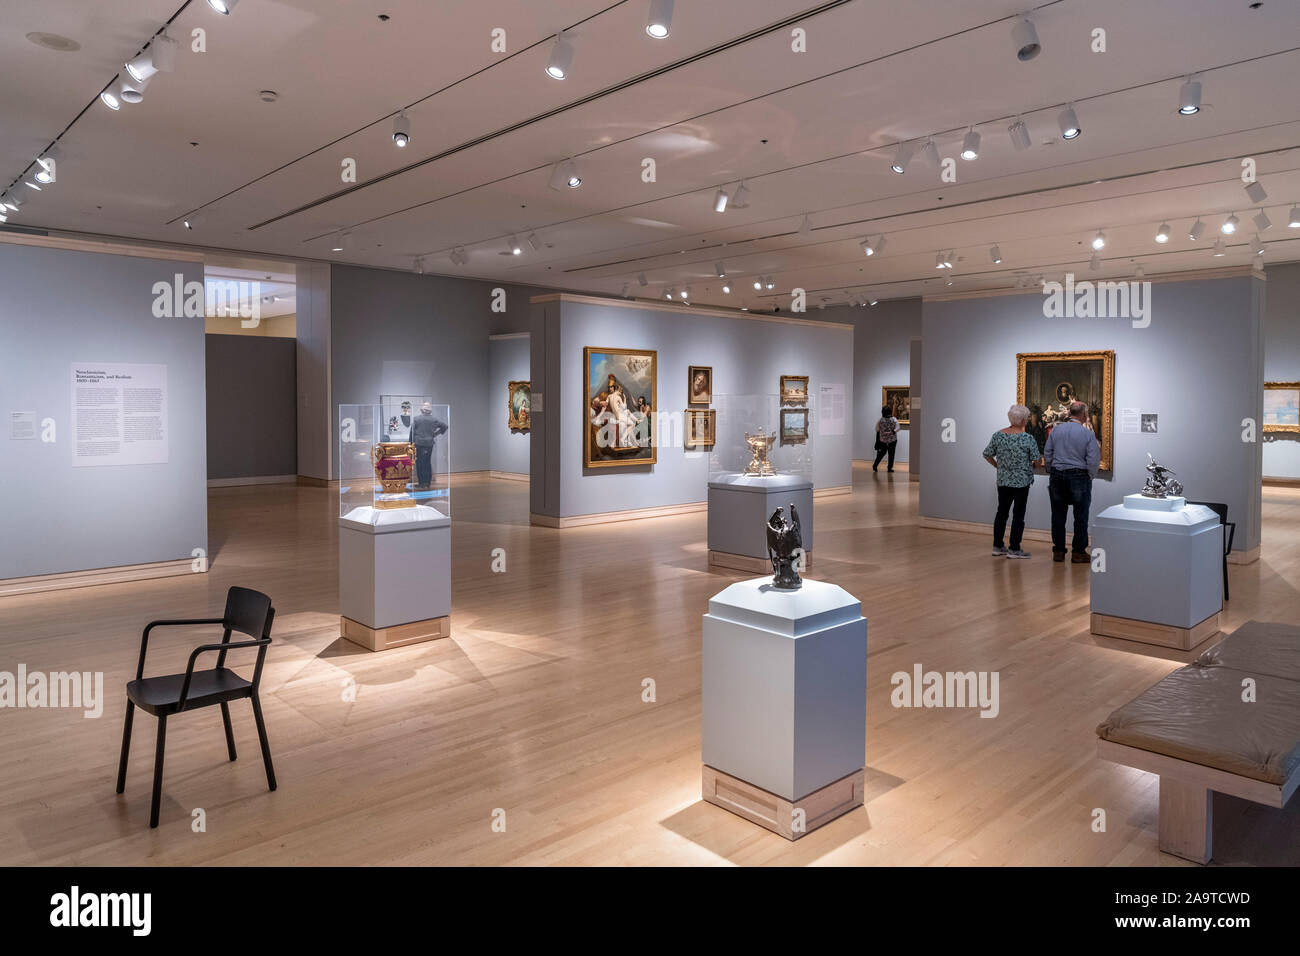 Interno dell'Indianapolis Museum of Art a Newfields, Indianapolis, Indiana, Stati Uniti d'America. Foto Stock